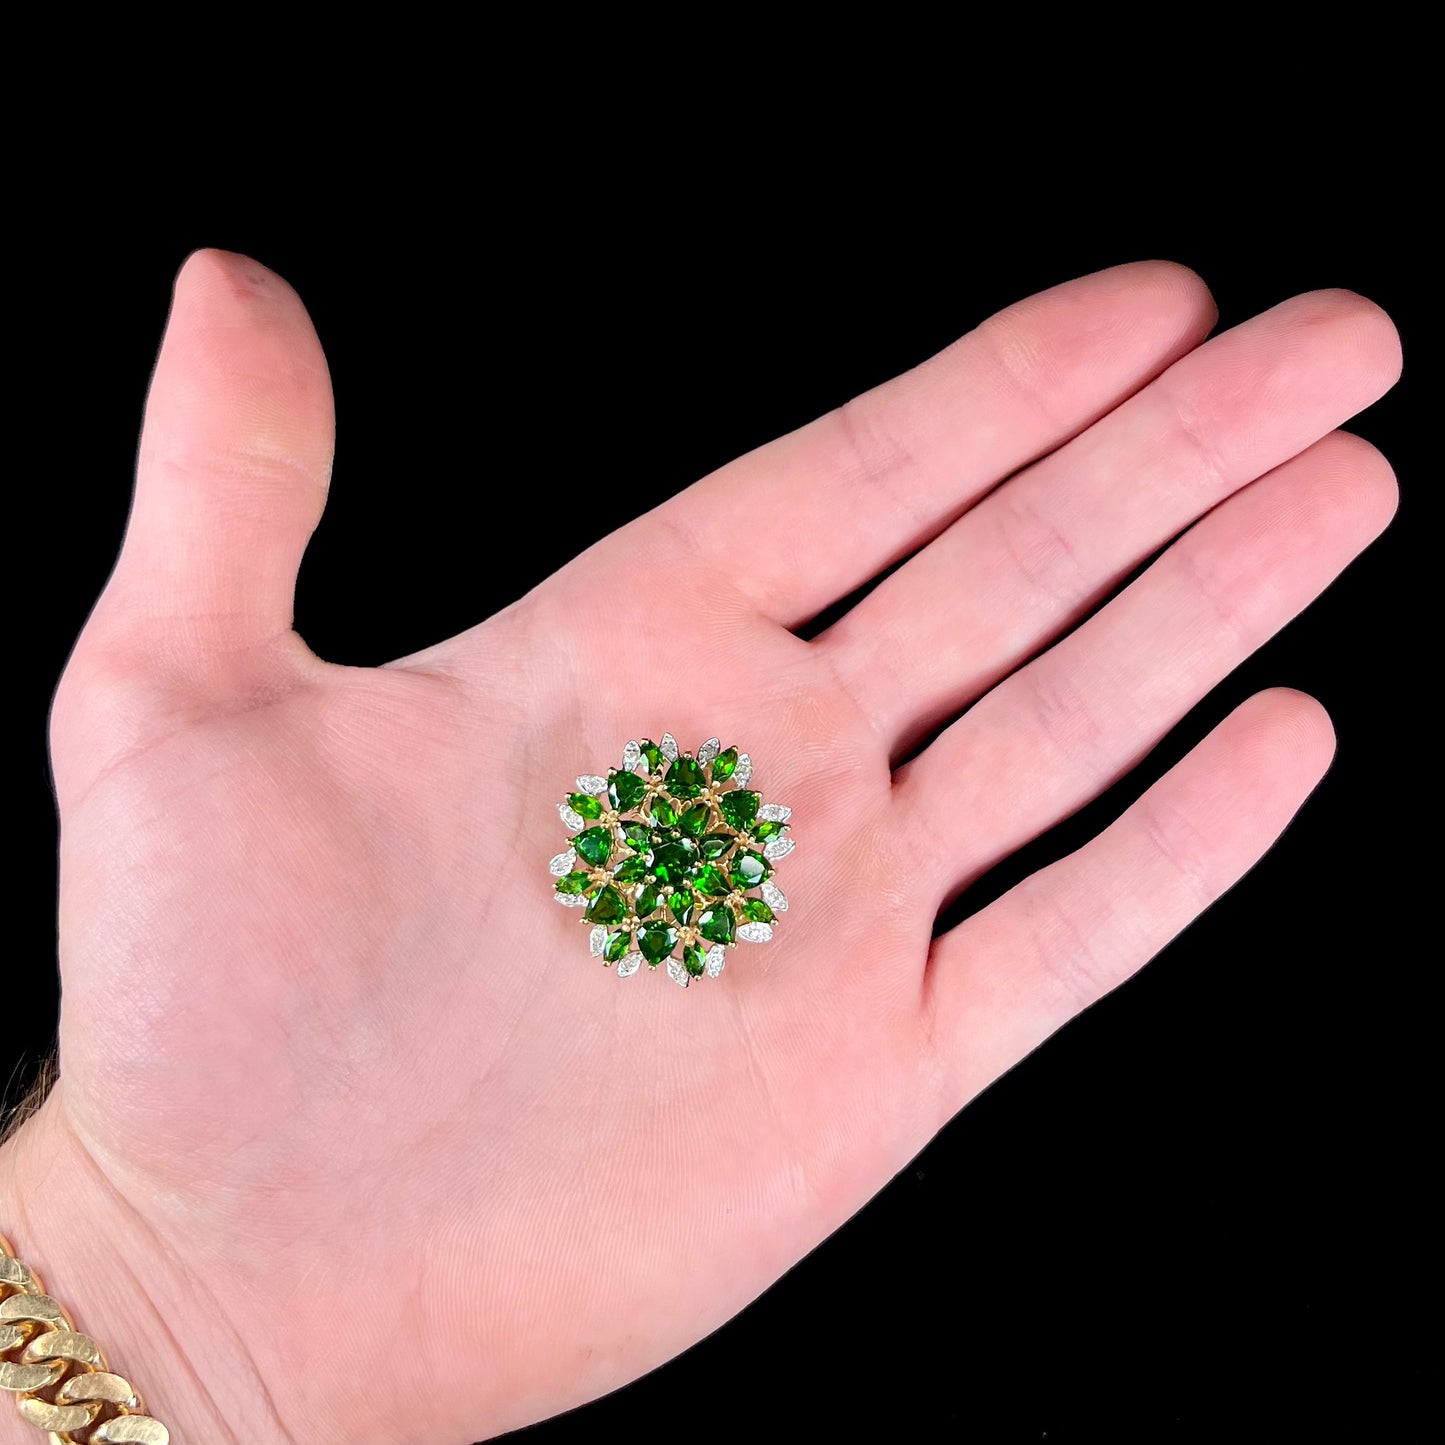 A ladies' pendant set with green chrome diopside stones and diamonds.  The pendant can be worn as a brooch.